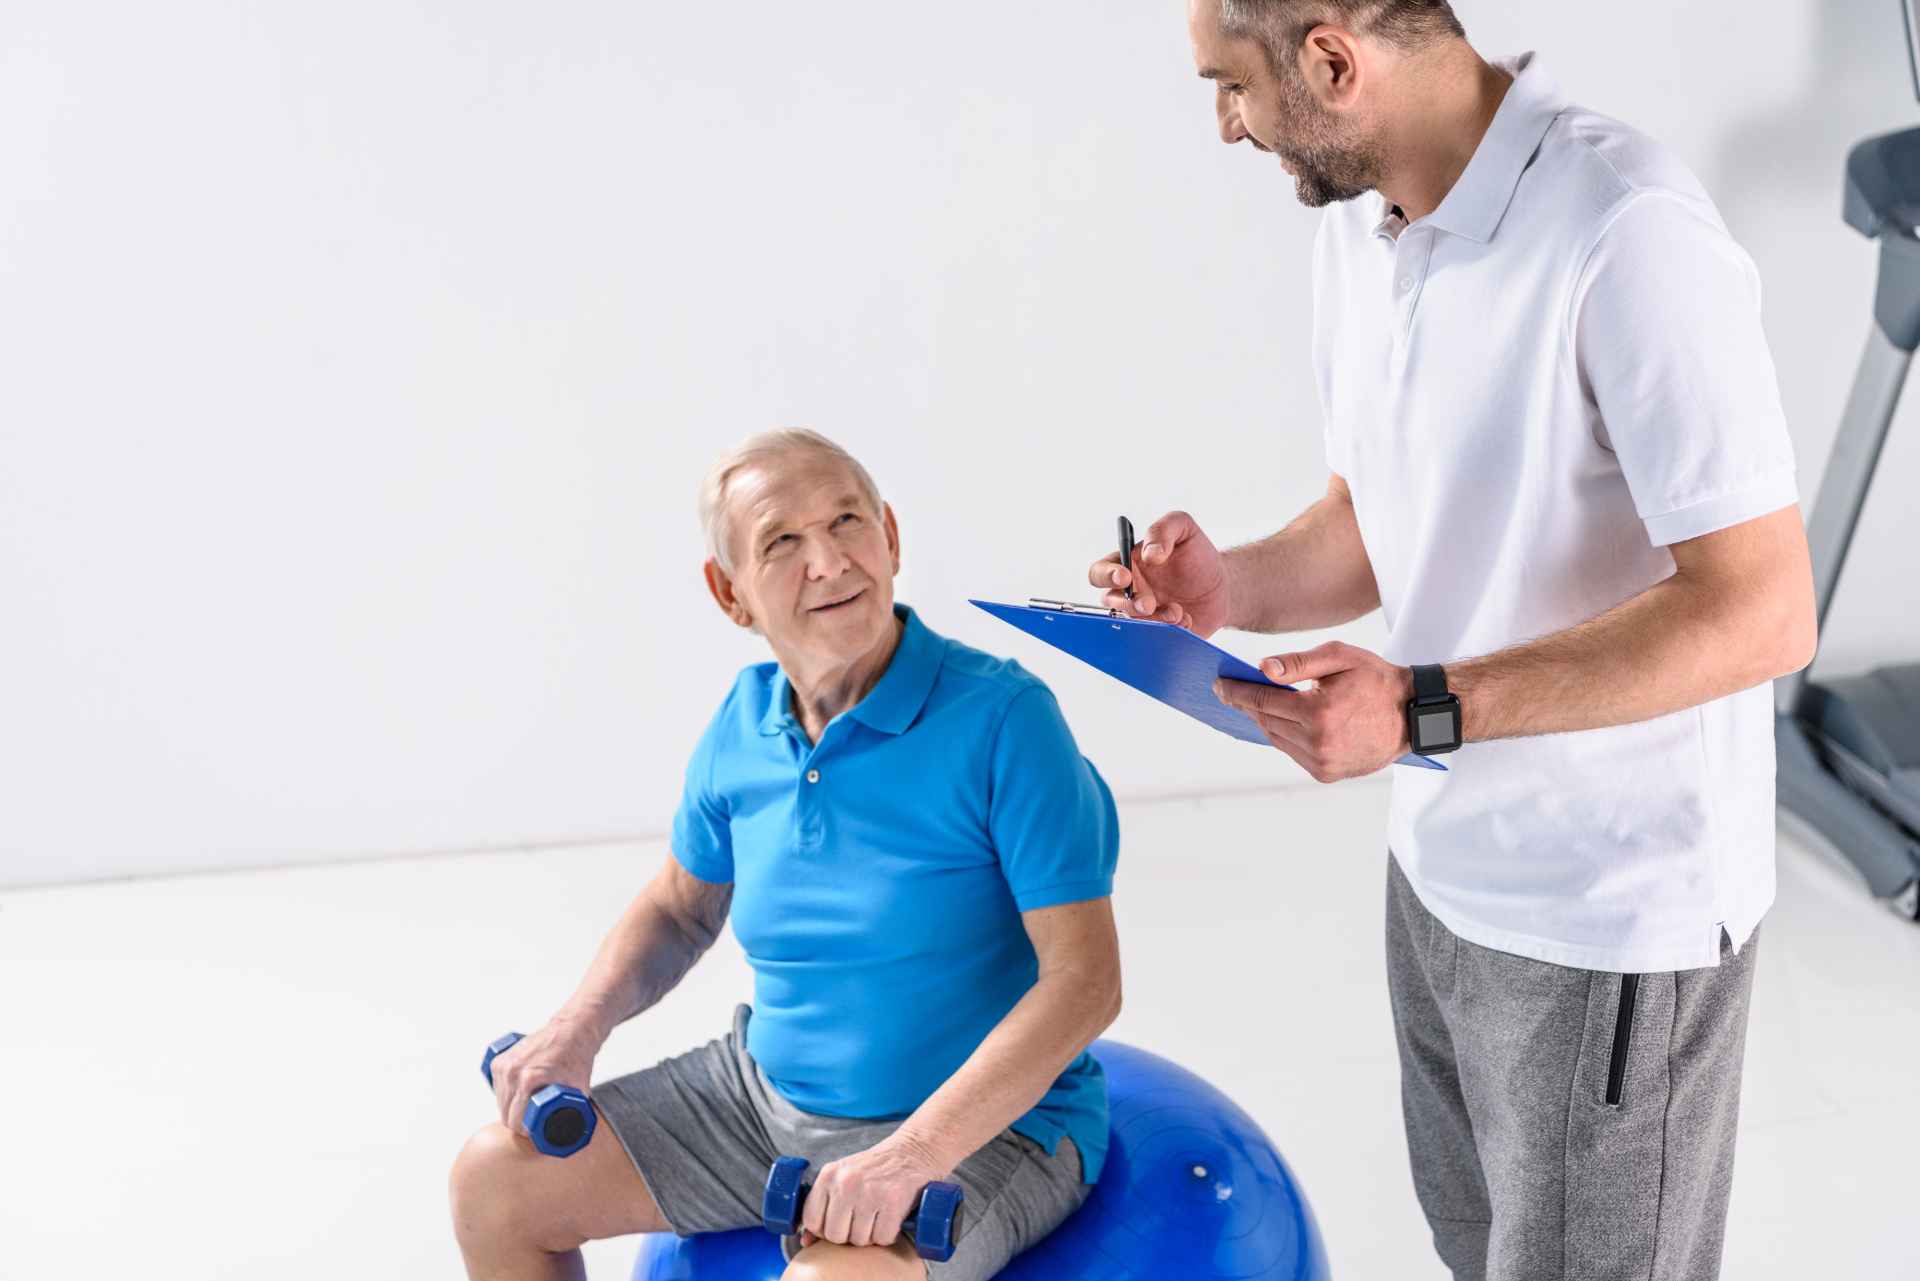 How Much Can a Physical Therapist Earn